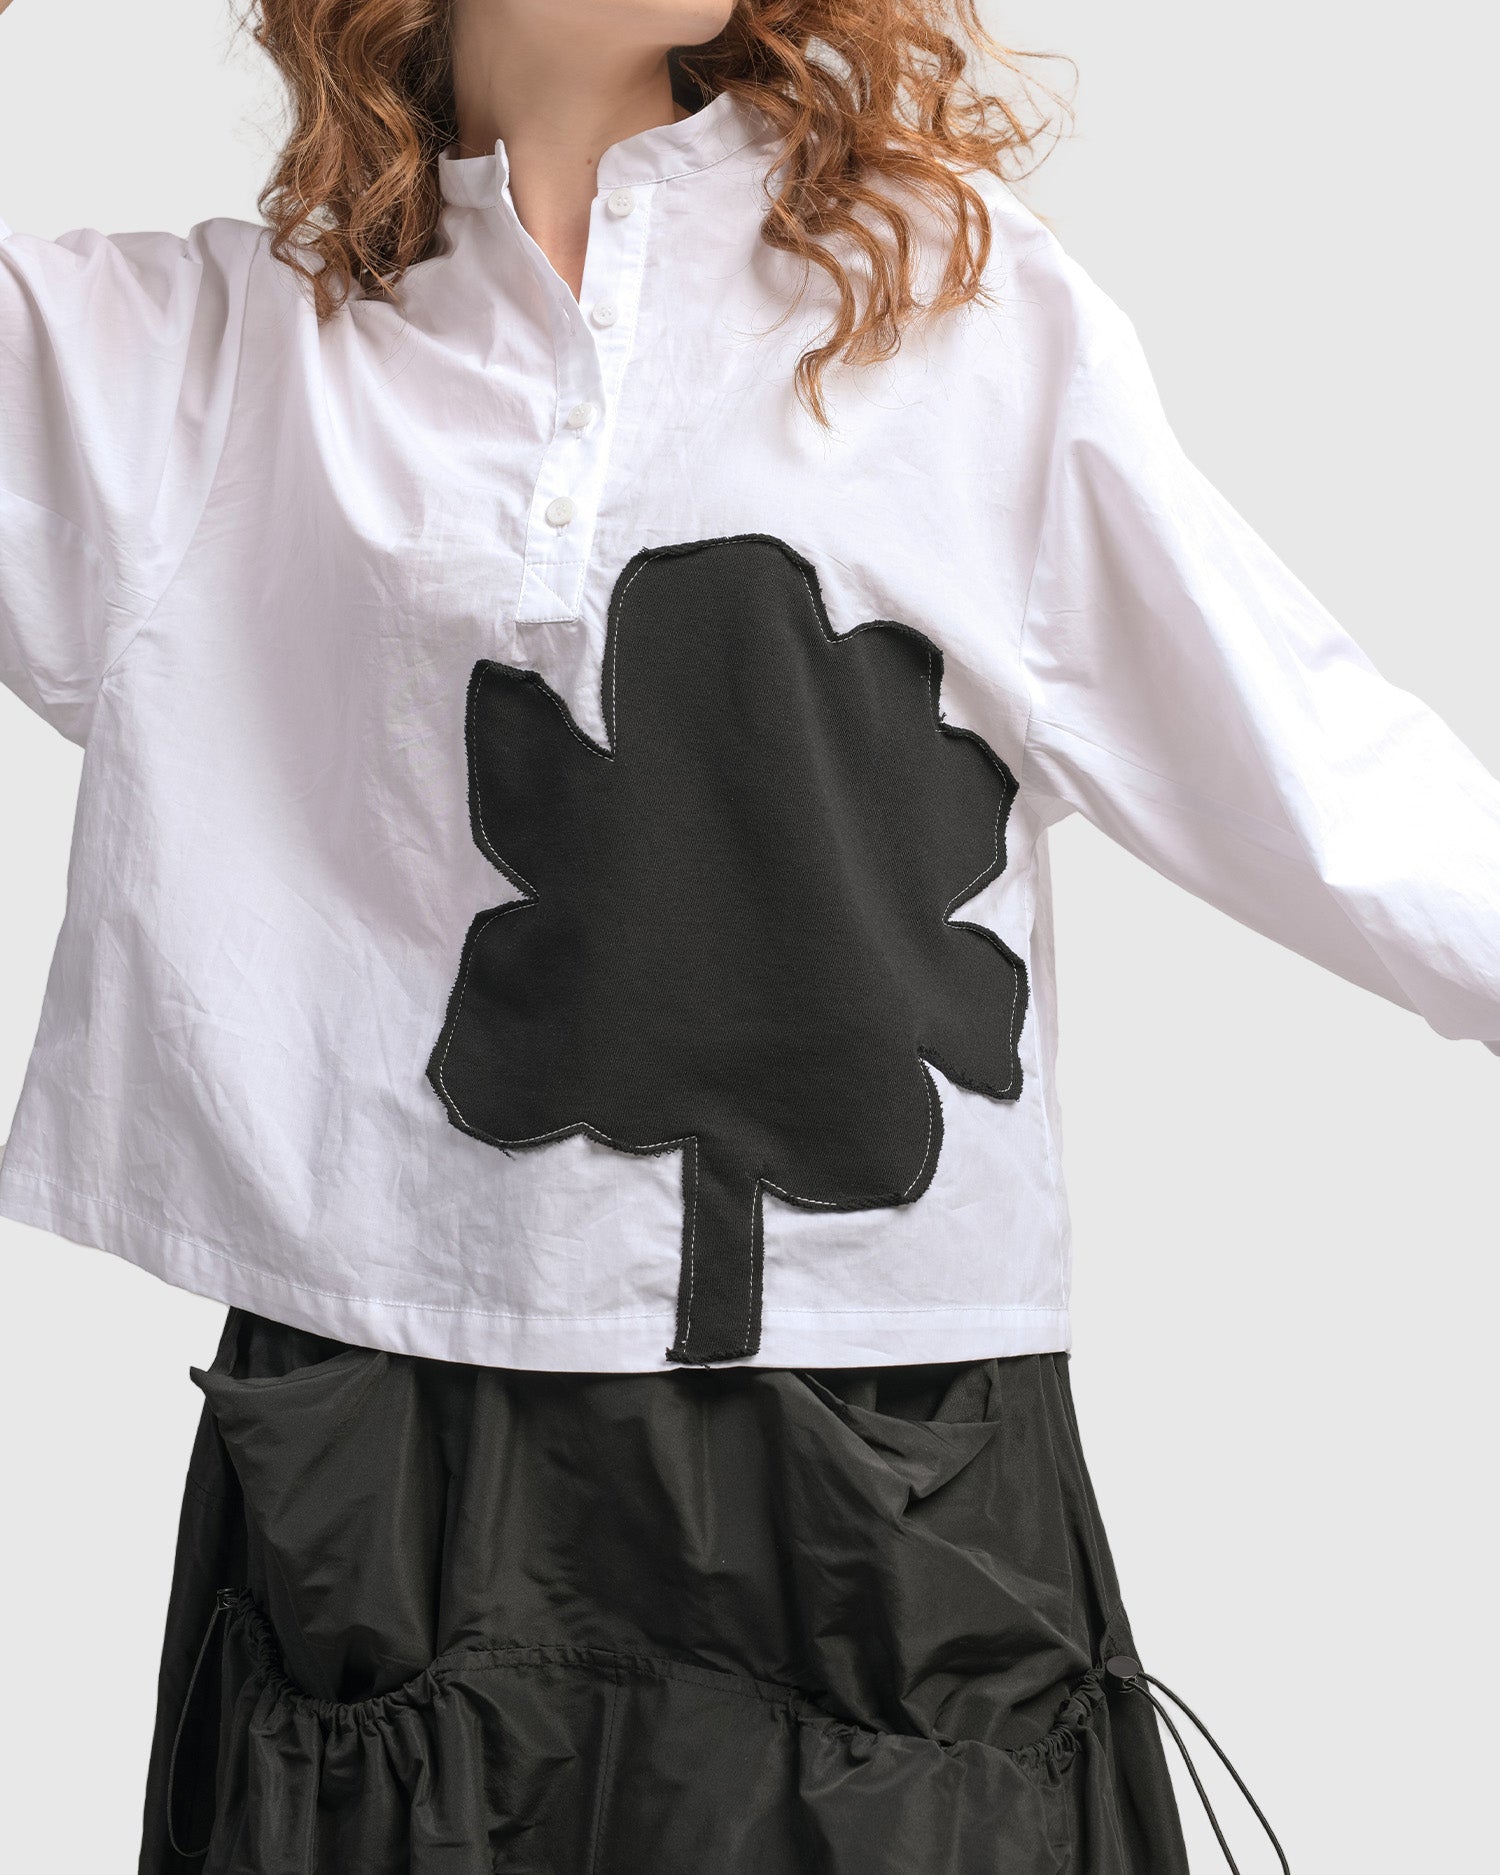 Front close up view of a woman wearing the Alembika Urban Modern Flower Top